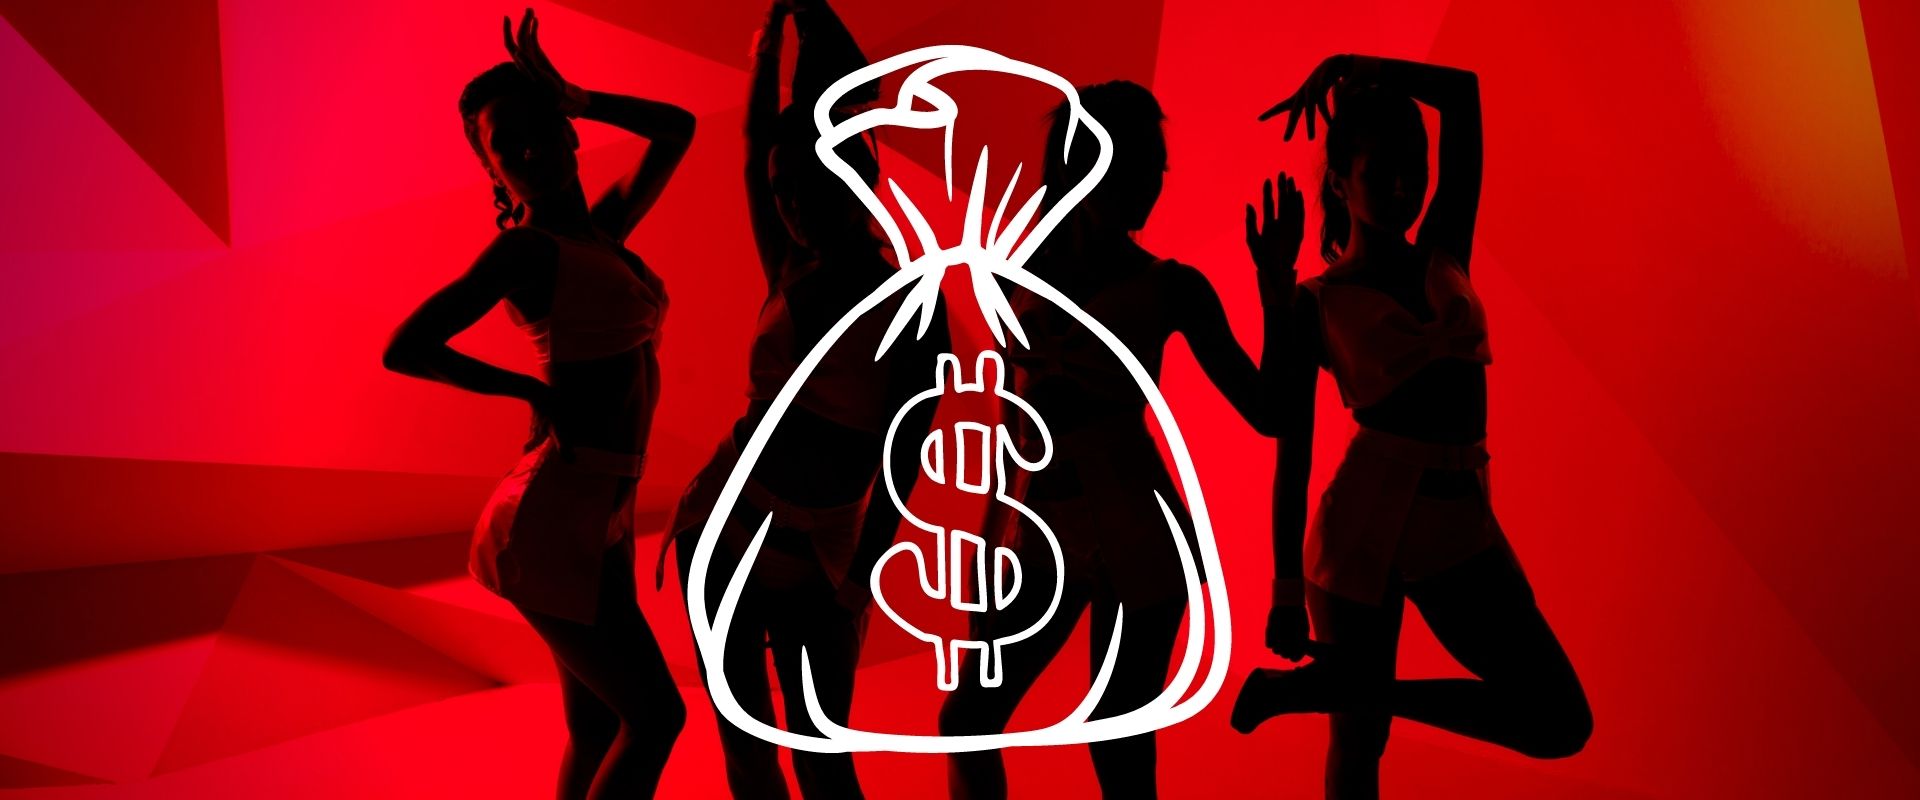 100 Ways To Make Money Sexually Online (Without Showing Your Face)